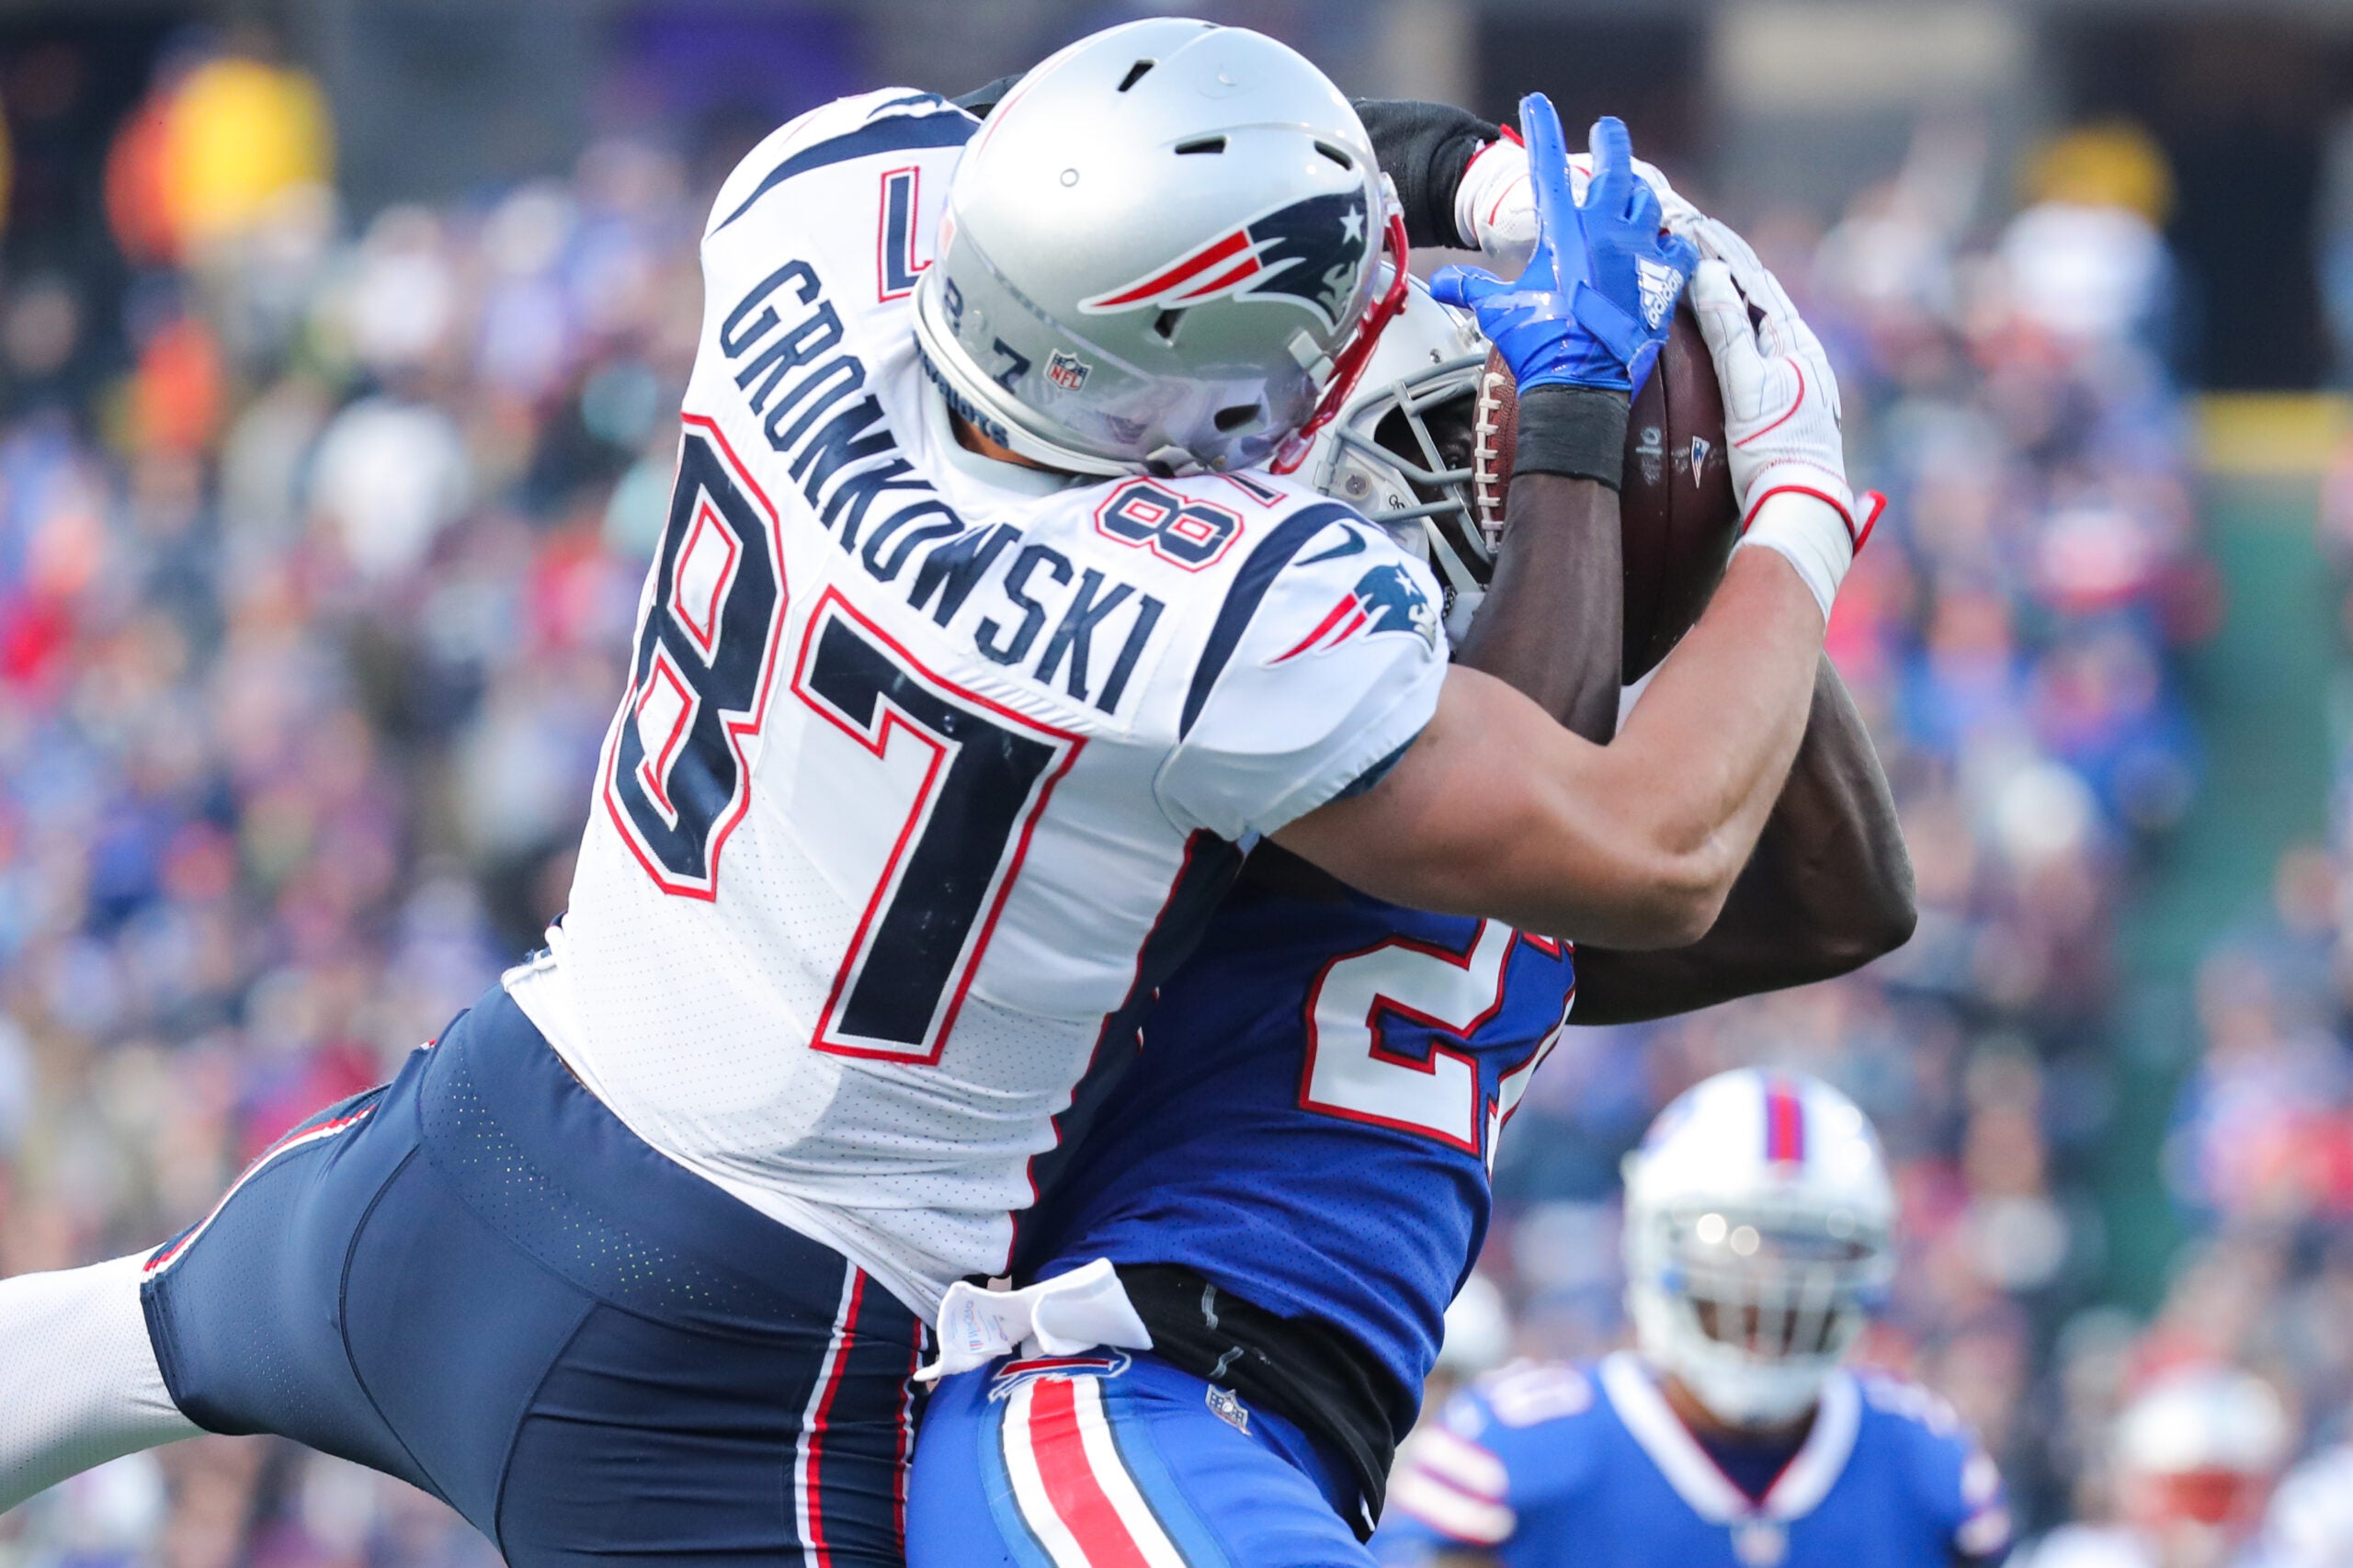 The Bills were not happy about this 'dirty' hit from Gronk